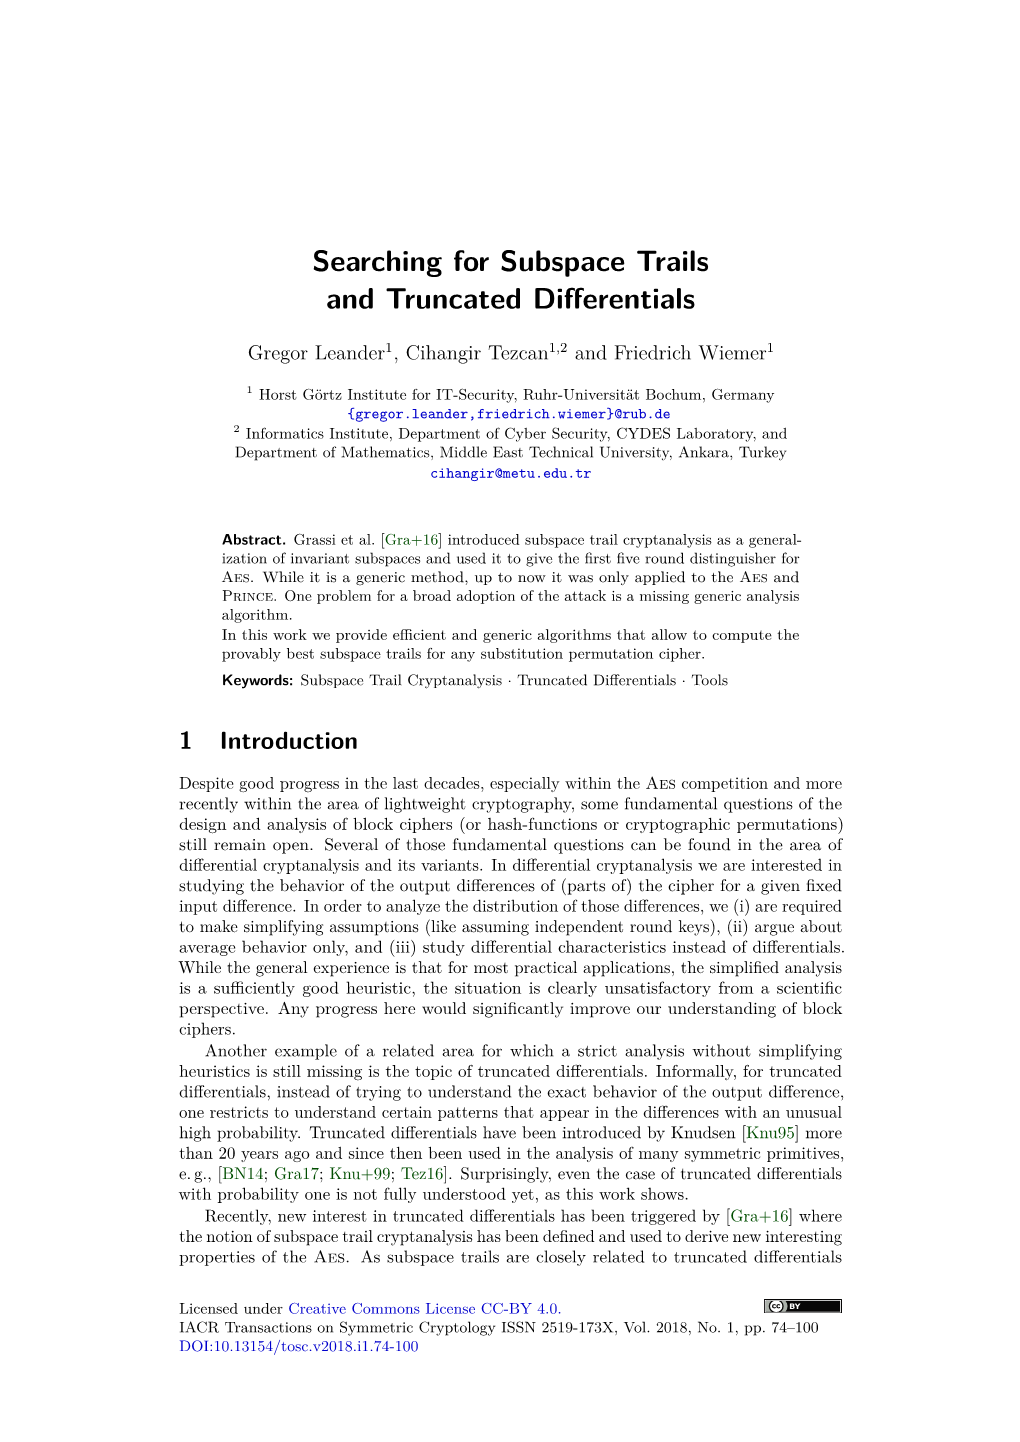 Searching for Subspace Trails and Truncated Differentials